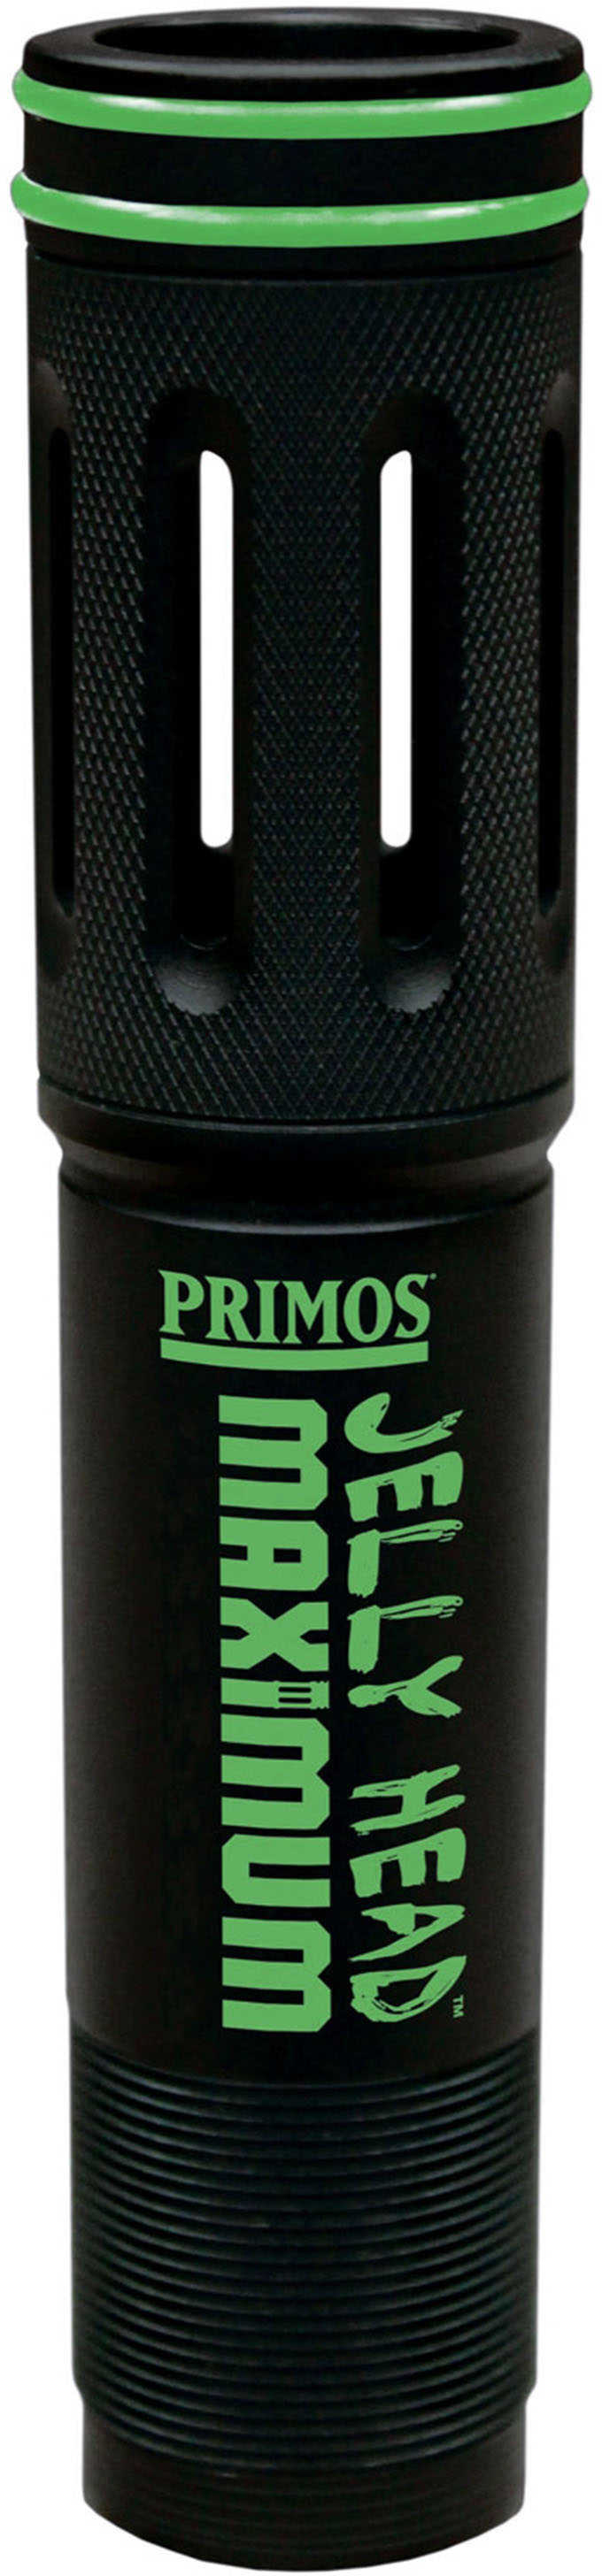 Primos 69404 Jelly Head 12 Gauge Mid-Range Invector-Plus Chrome Alloy Steel Red Anodized